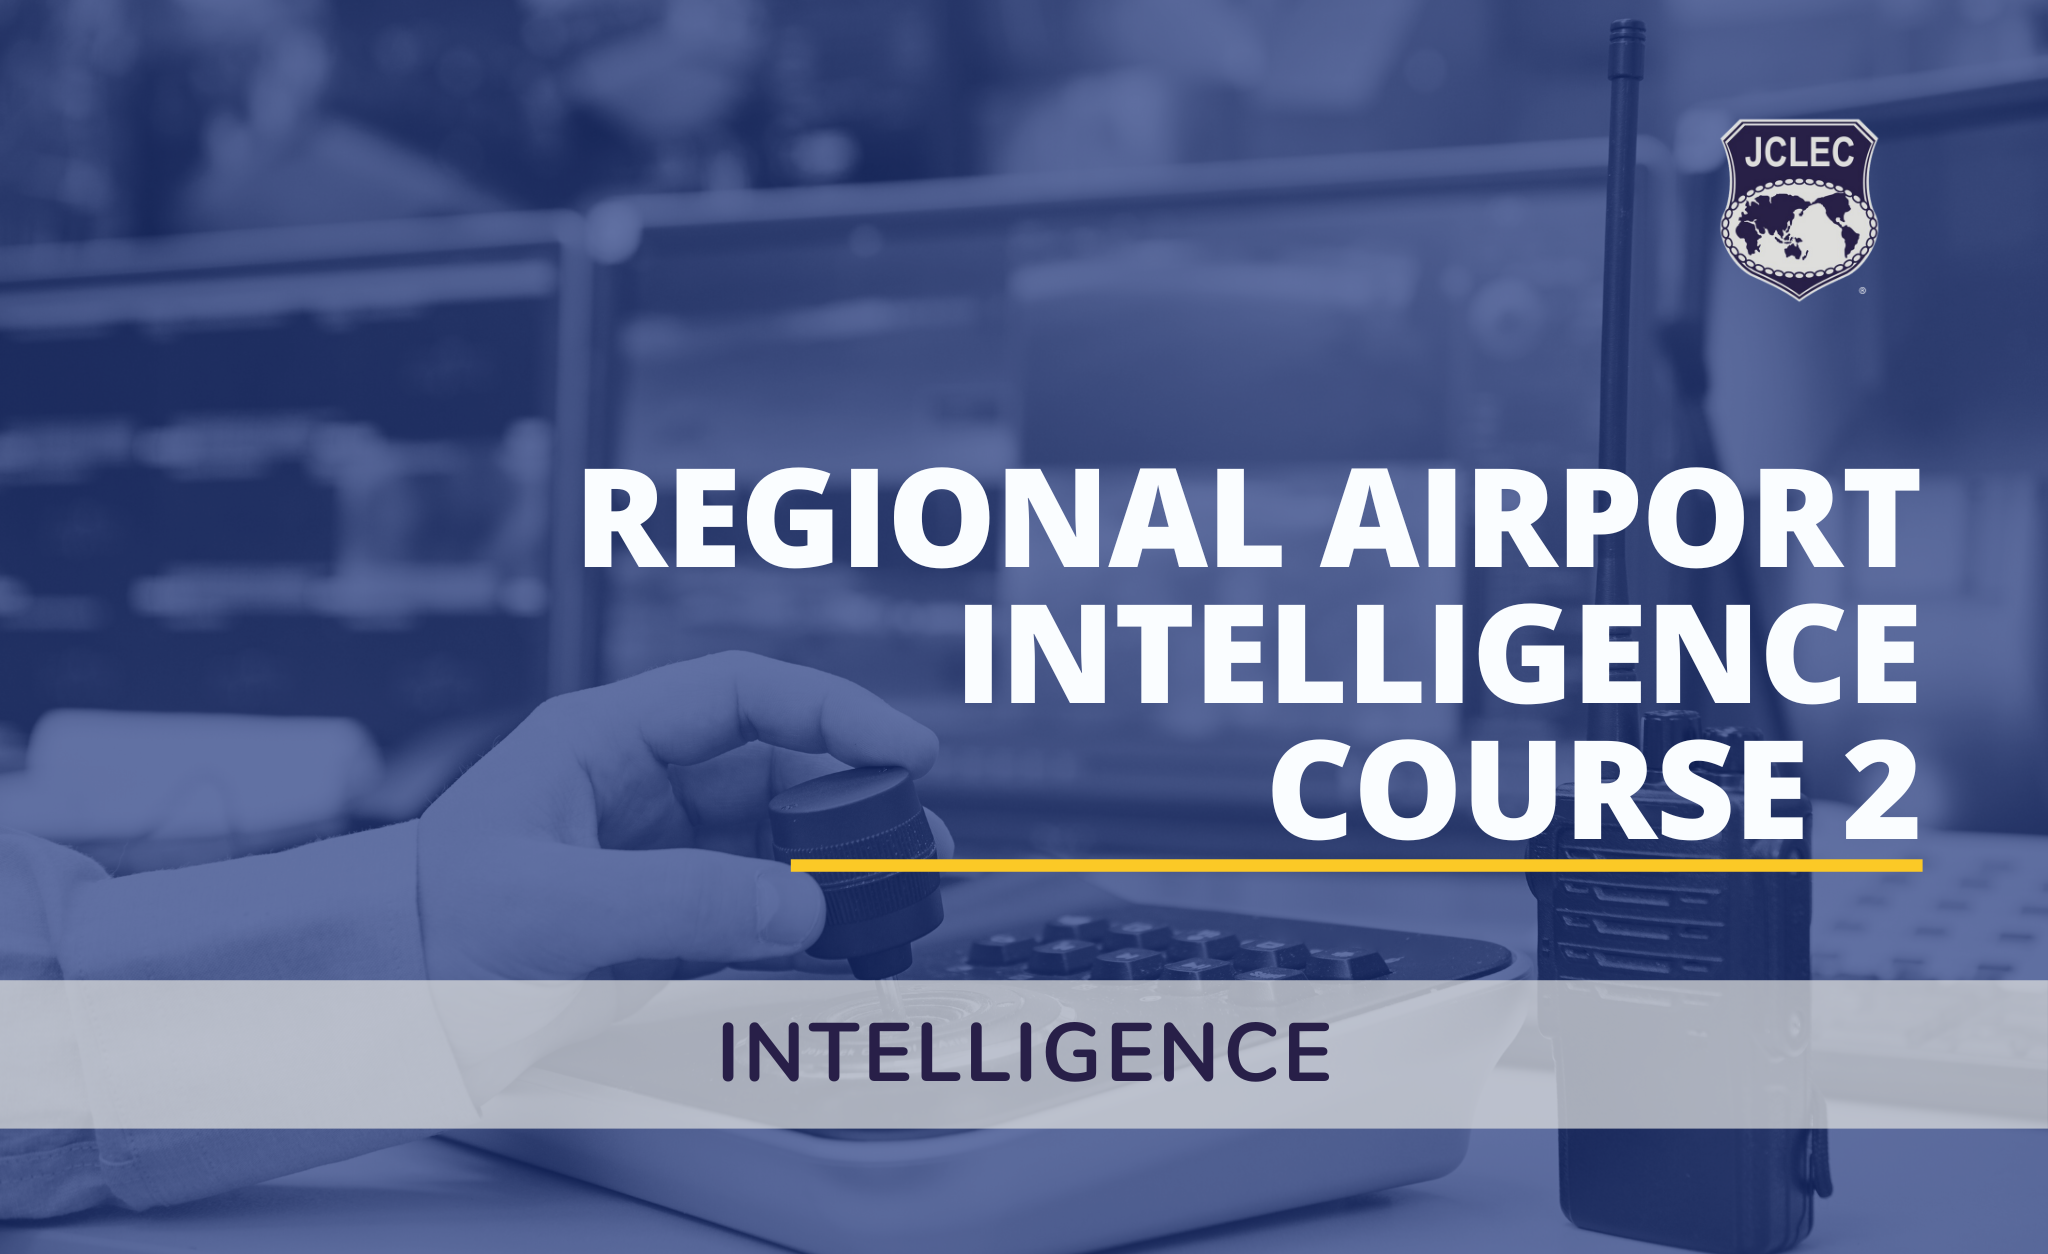 Regional Airport Intelligence Course 2